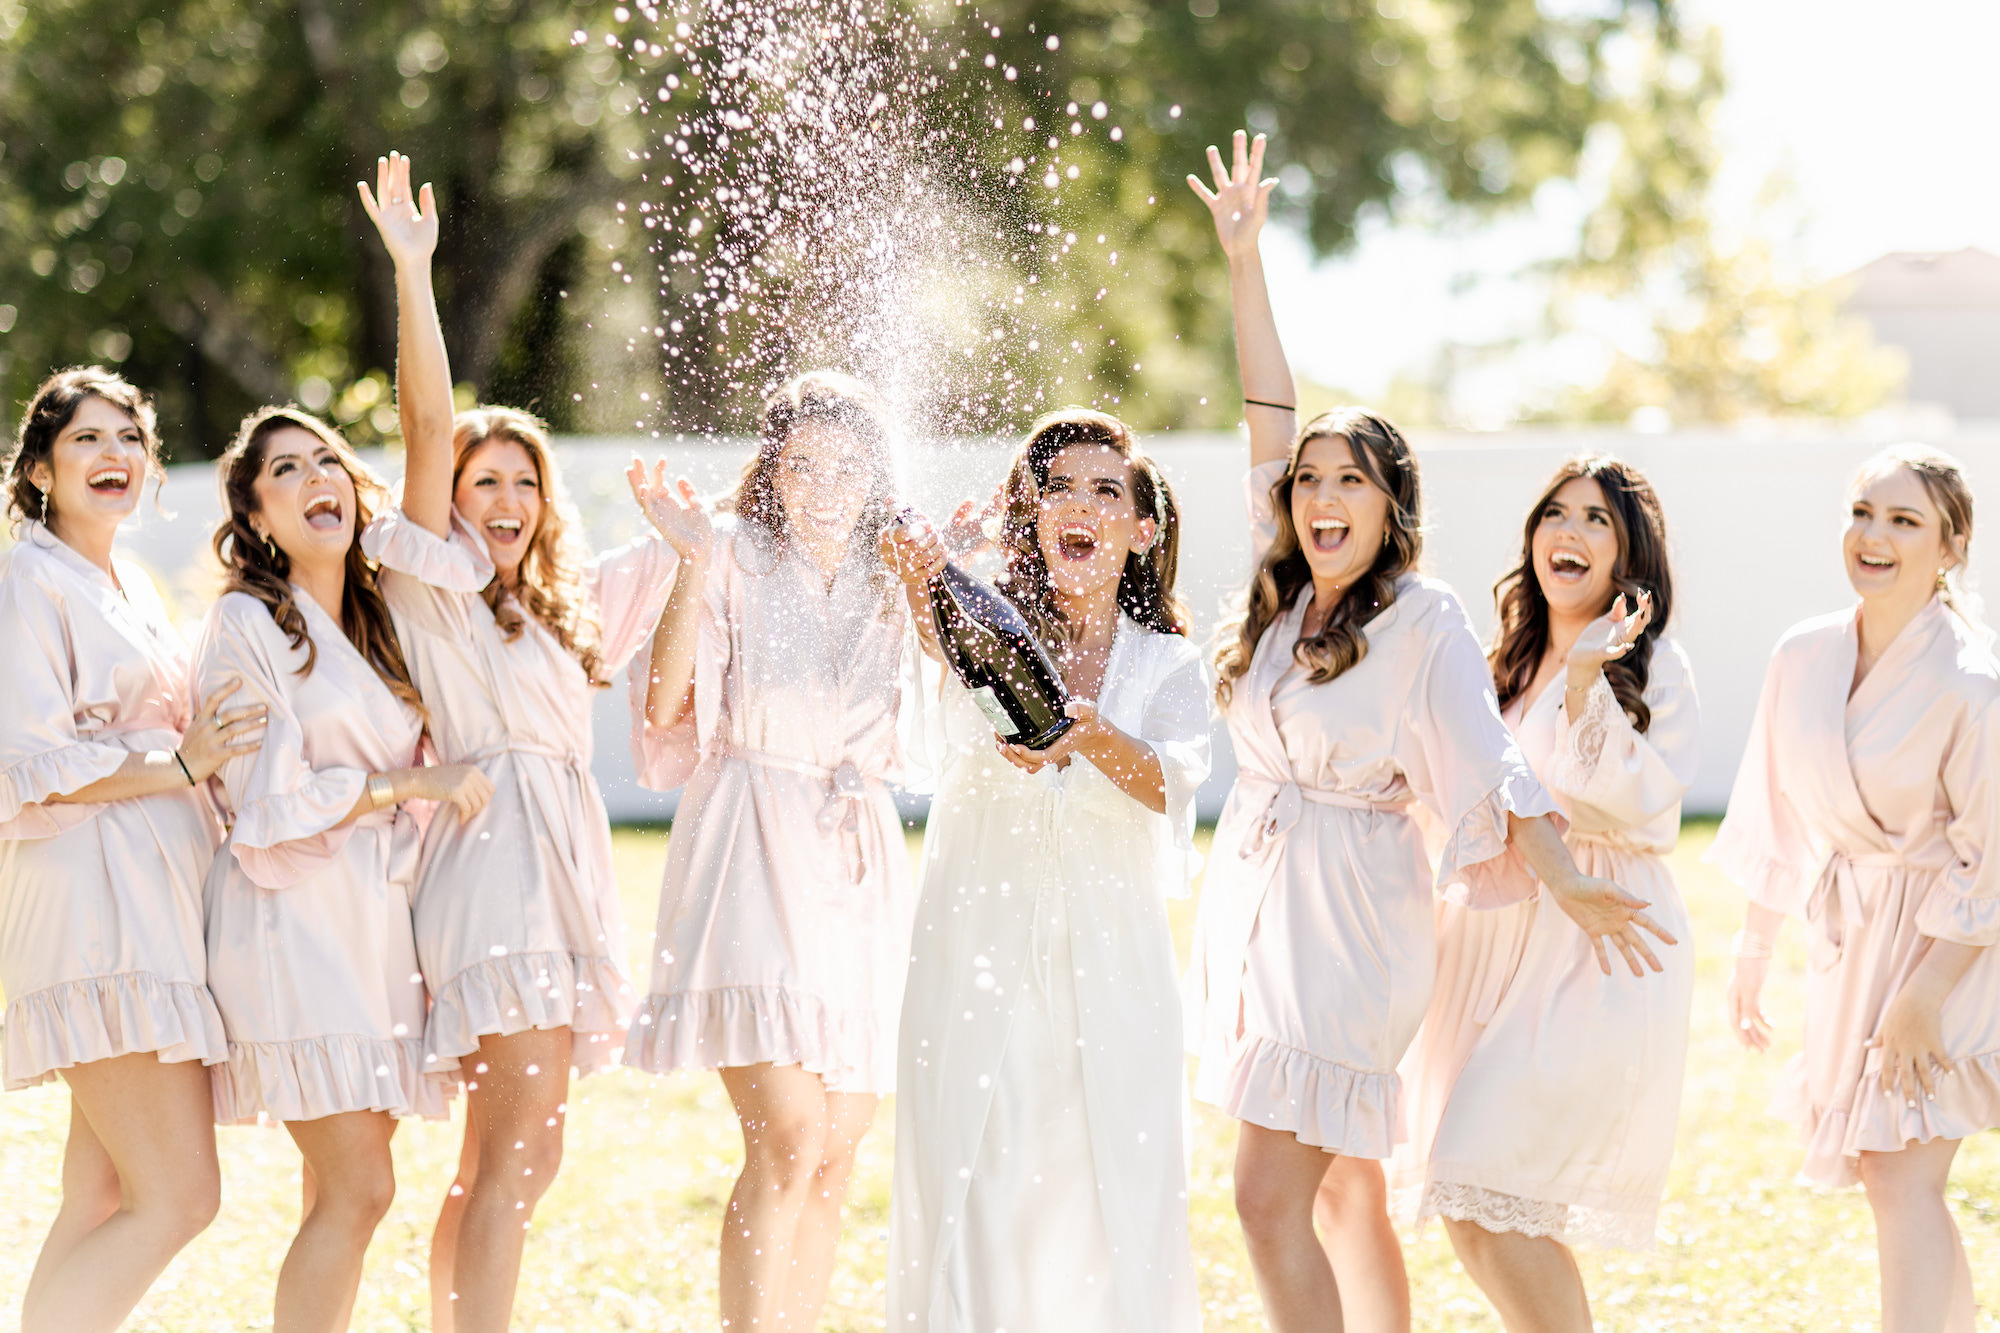 Fall Boho Bride and Bridesmaids with Popping Bottle of Champagne and Matching Pink Robes | Tampa Bay Wedding Hair and Makeup Femme Akoi Beauty Studio